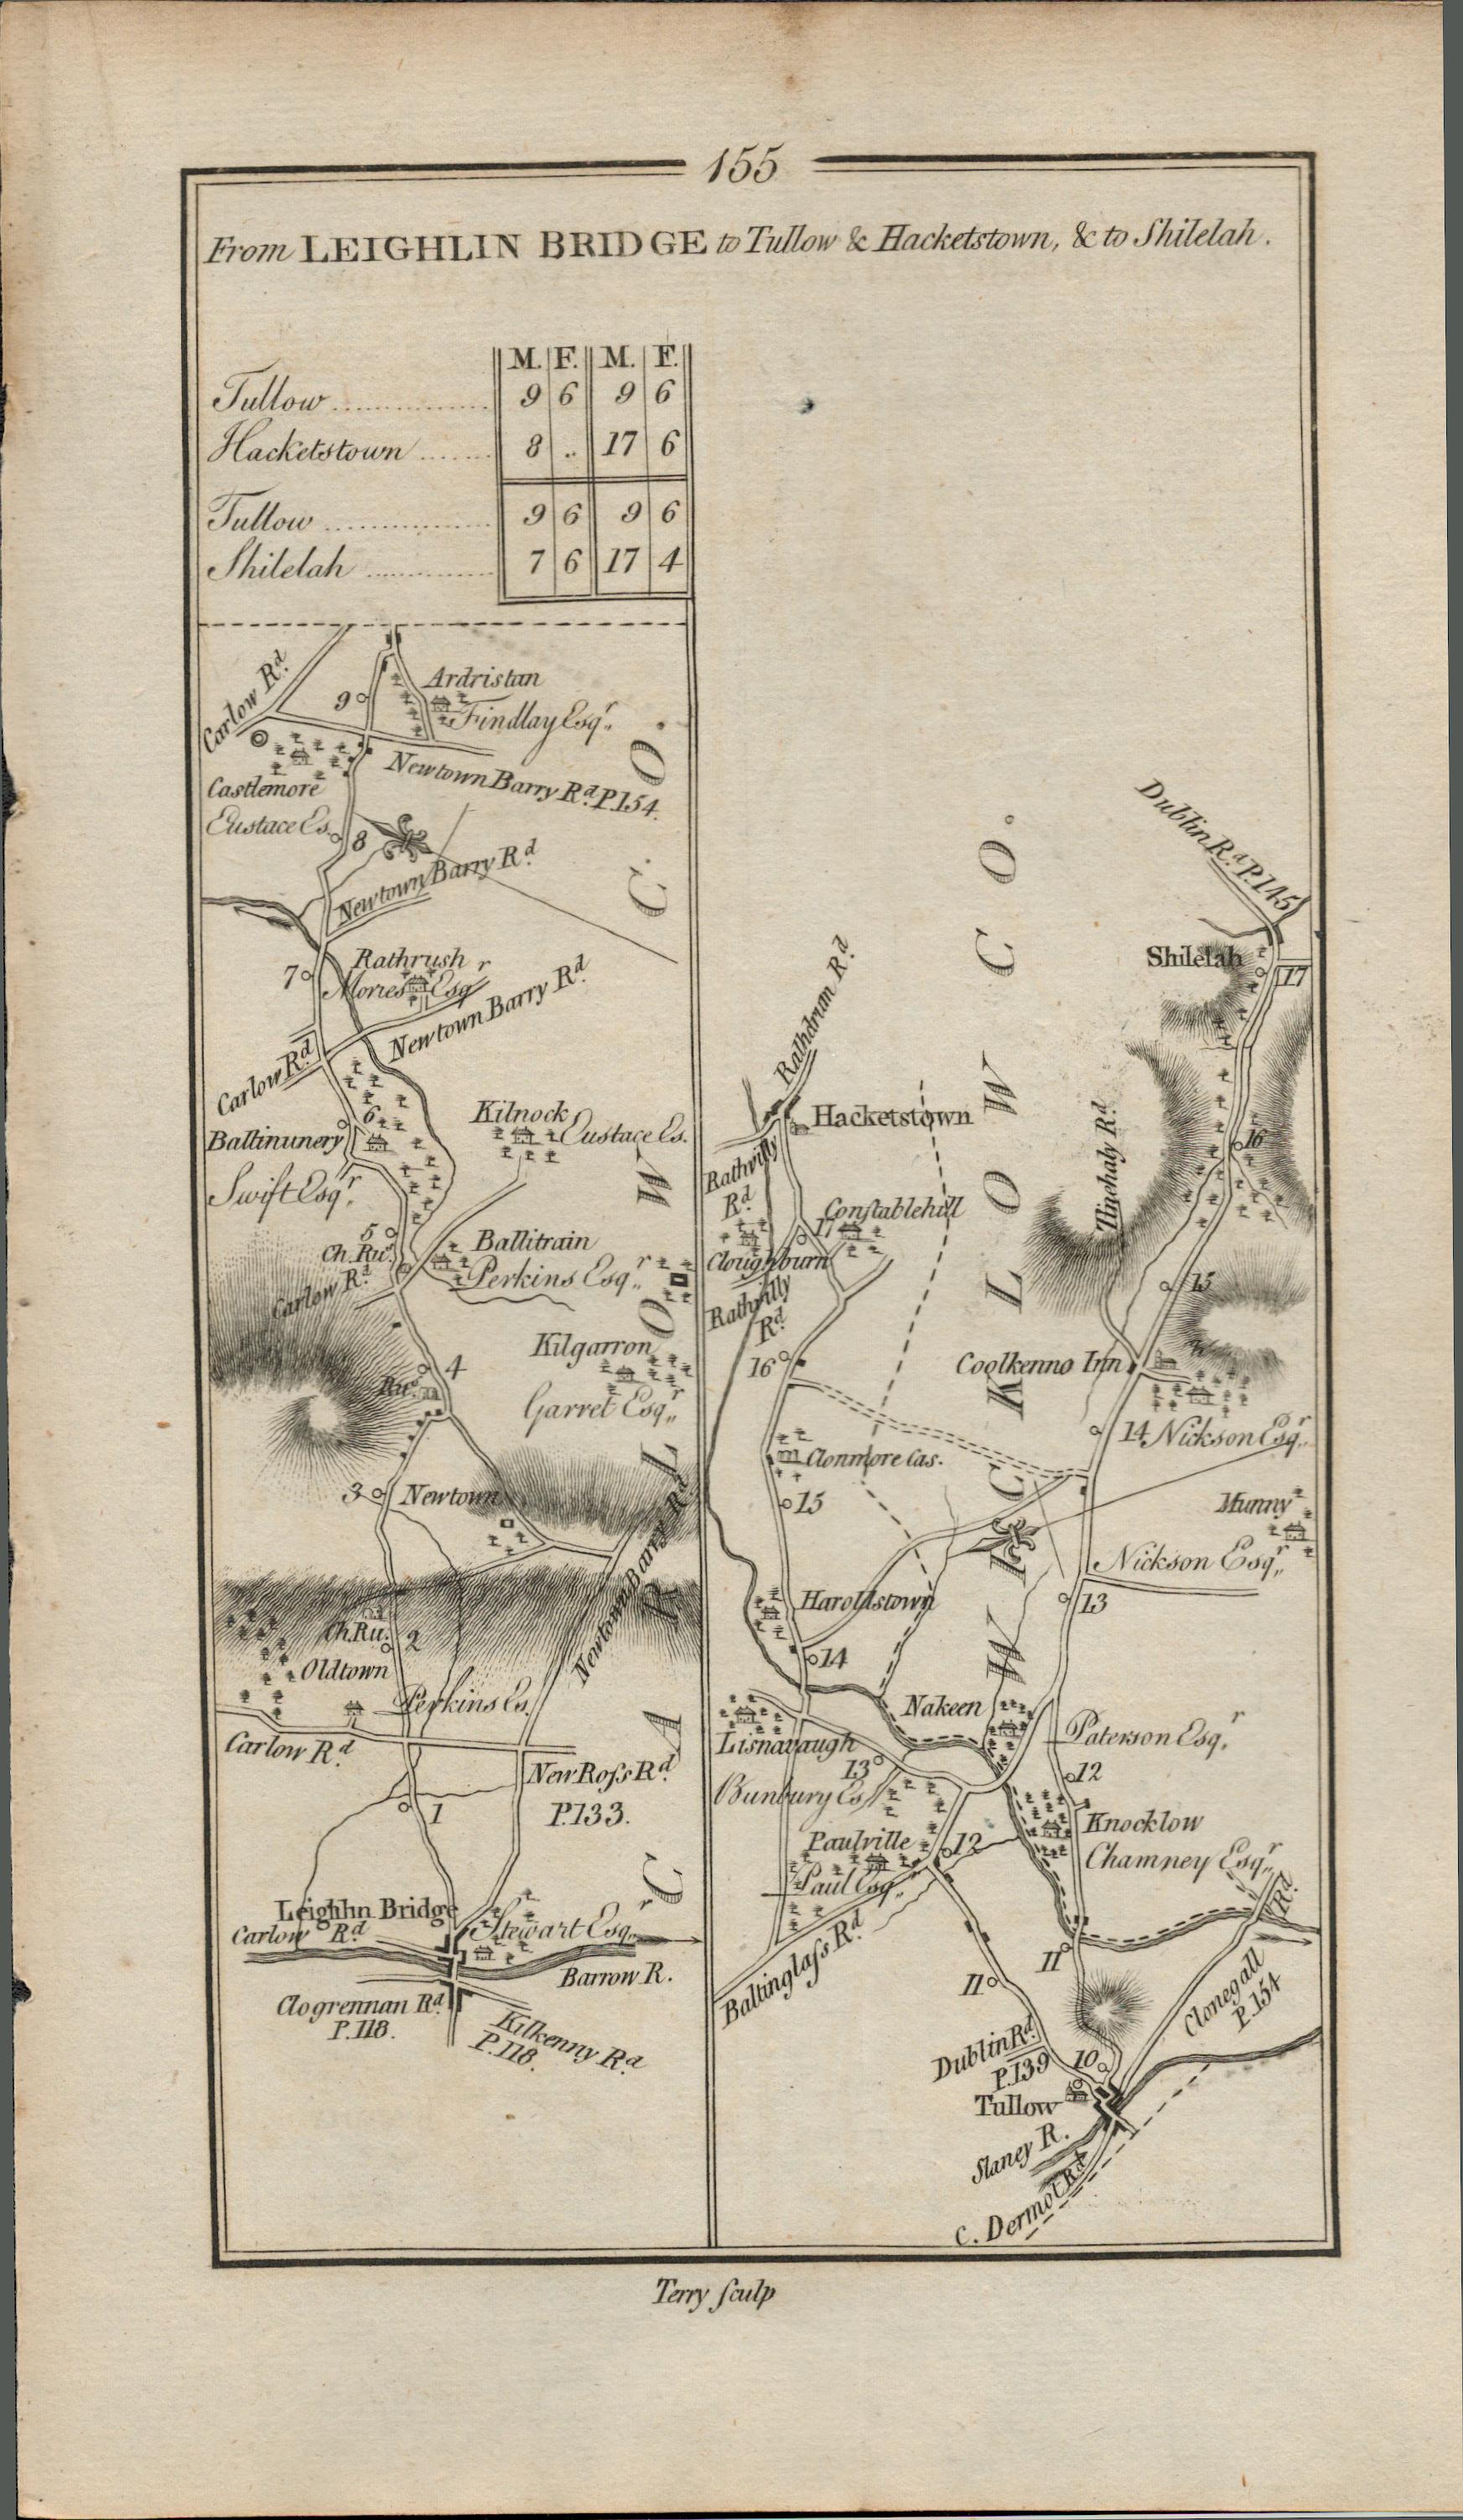 Taylor & Skinner 1777 Road Map Carlow Wicklow Kildare Laois Offaly Etc. - Image 2 of 2